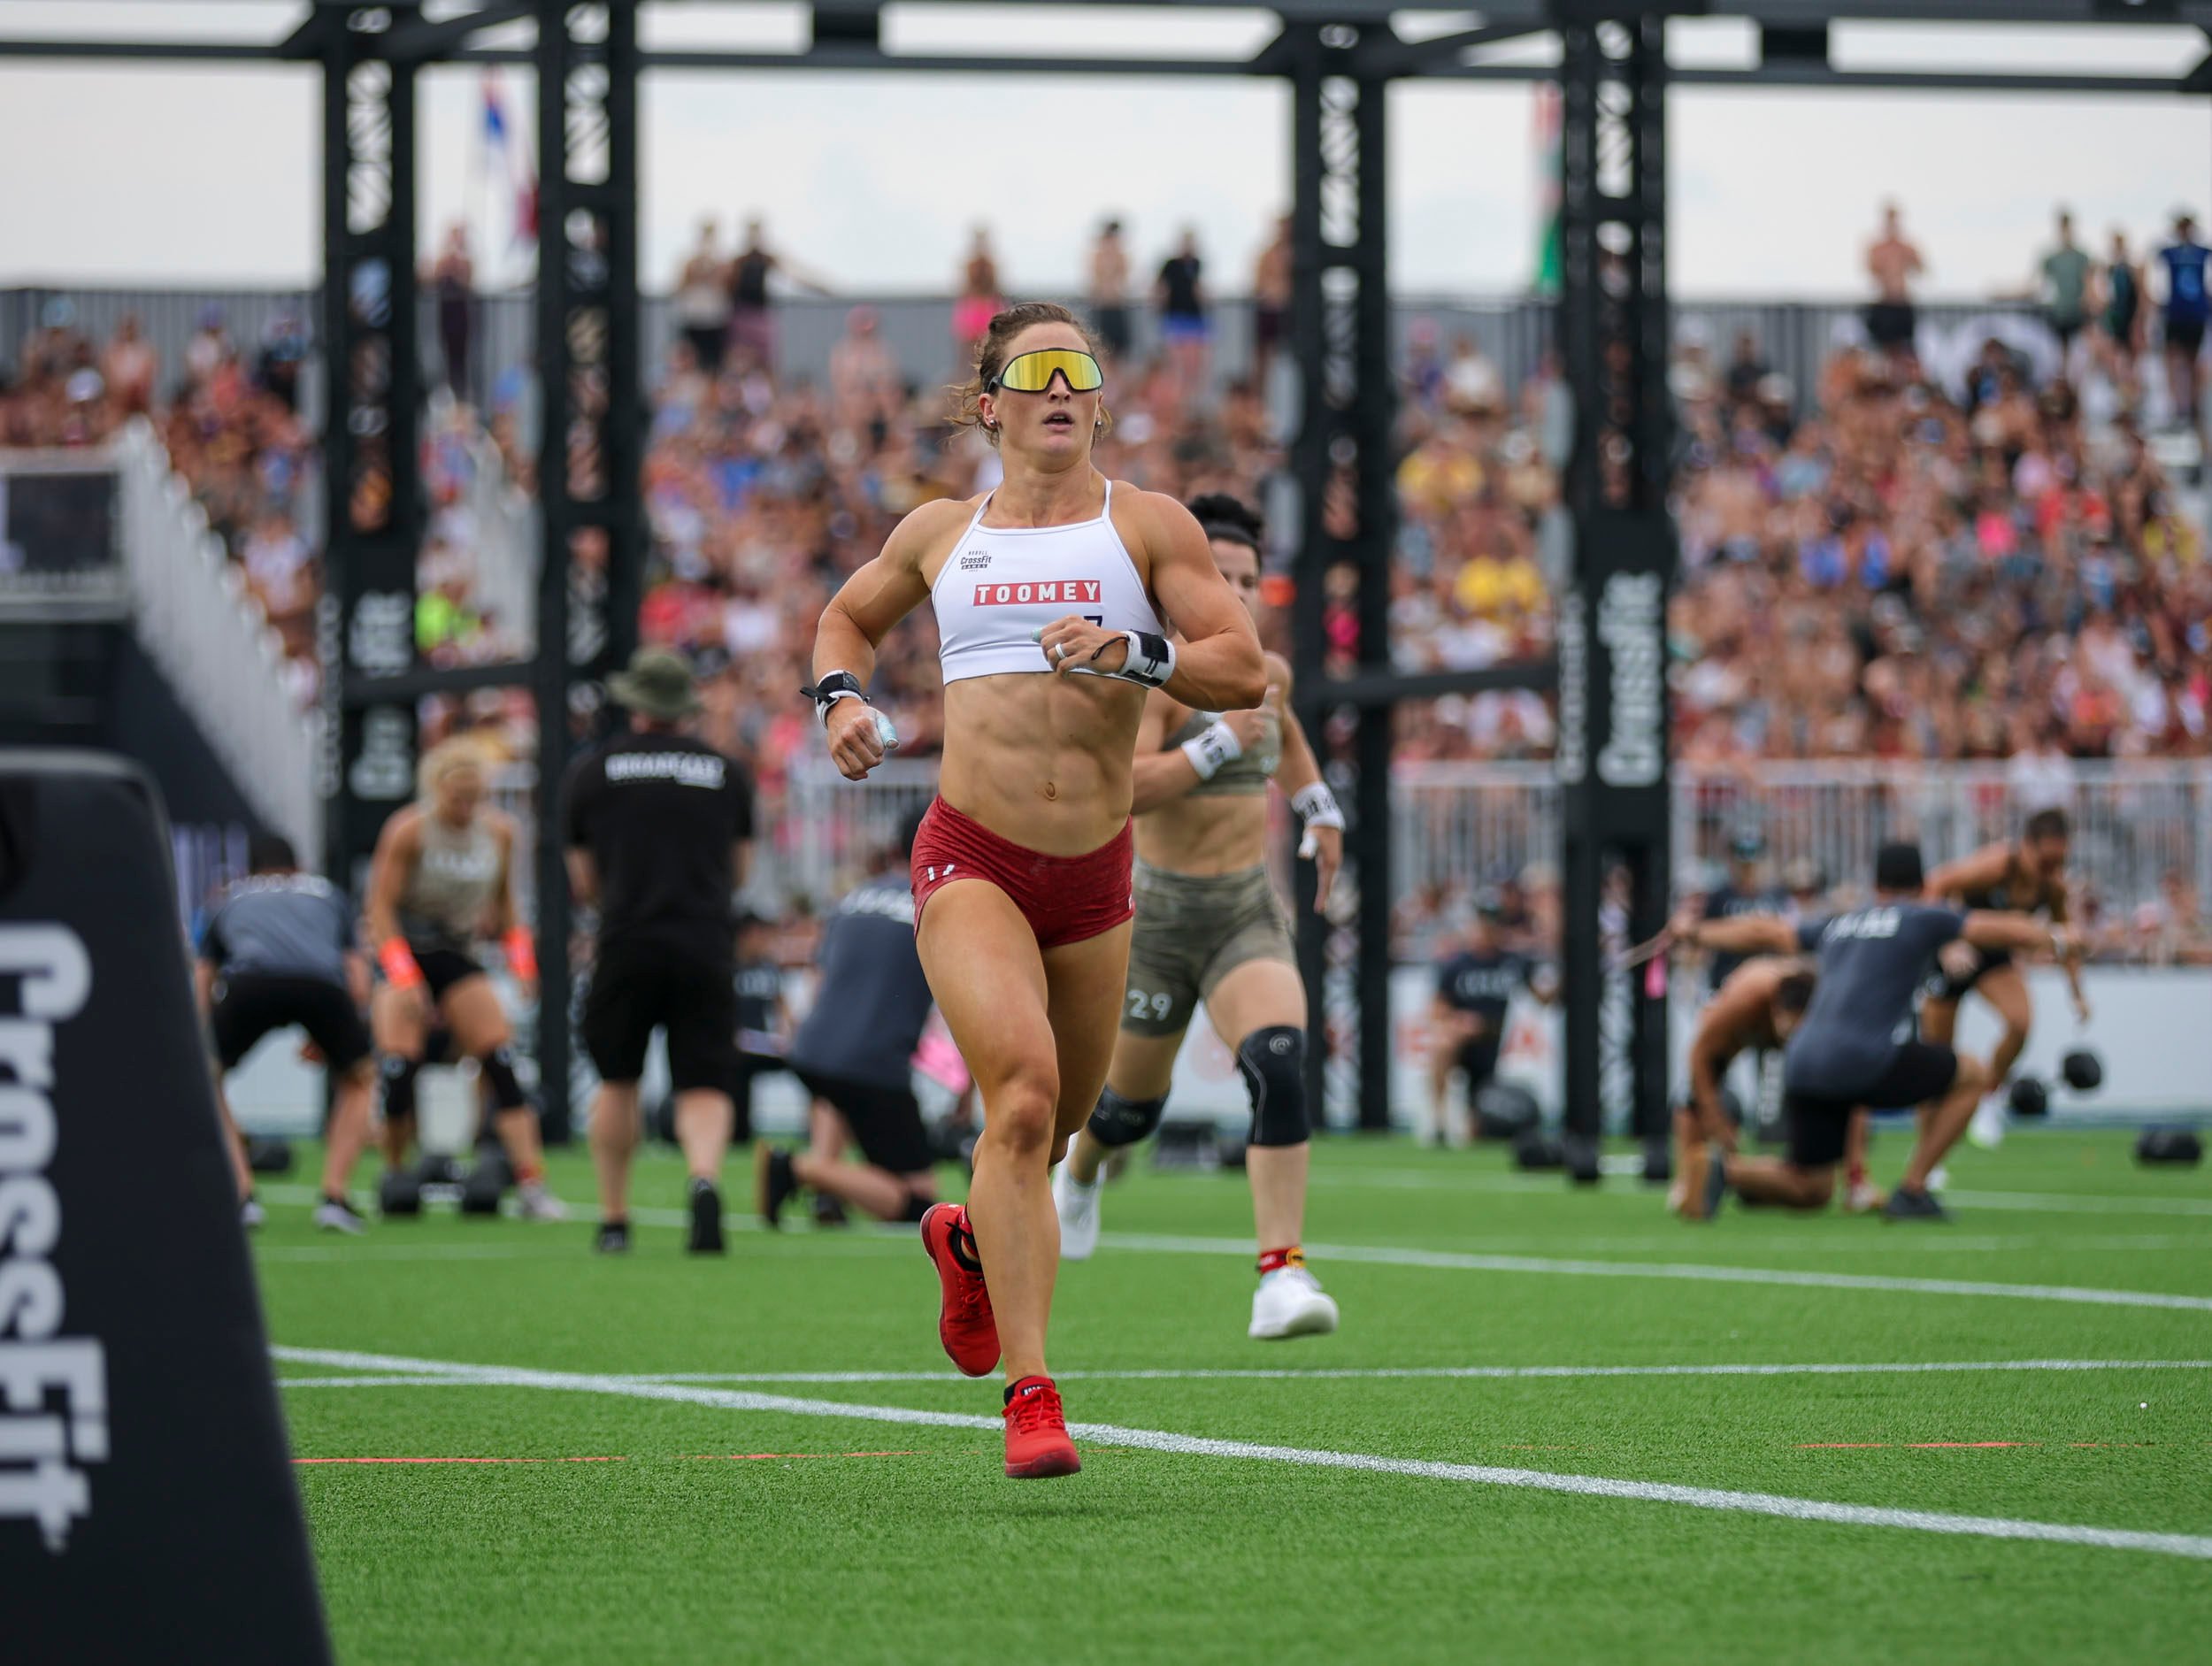 Tia-Clair Toomey leads going into the final day of the CrossFit Games. Photo: CrossFit Games